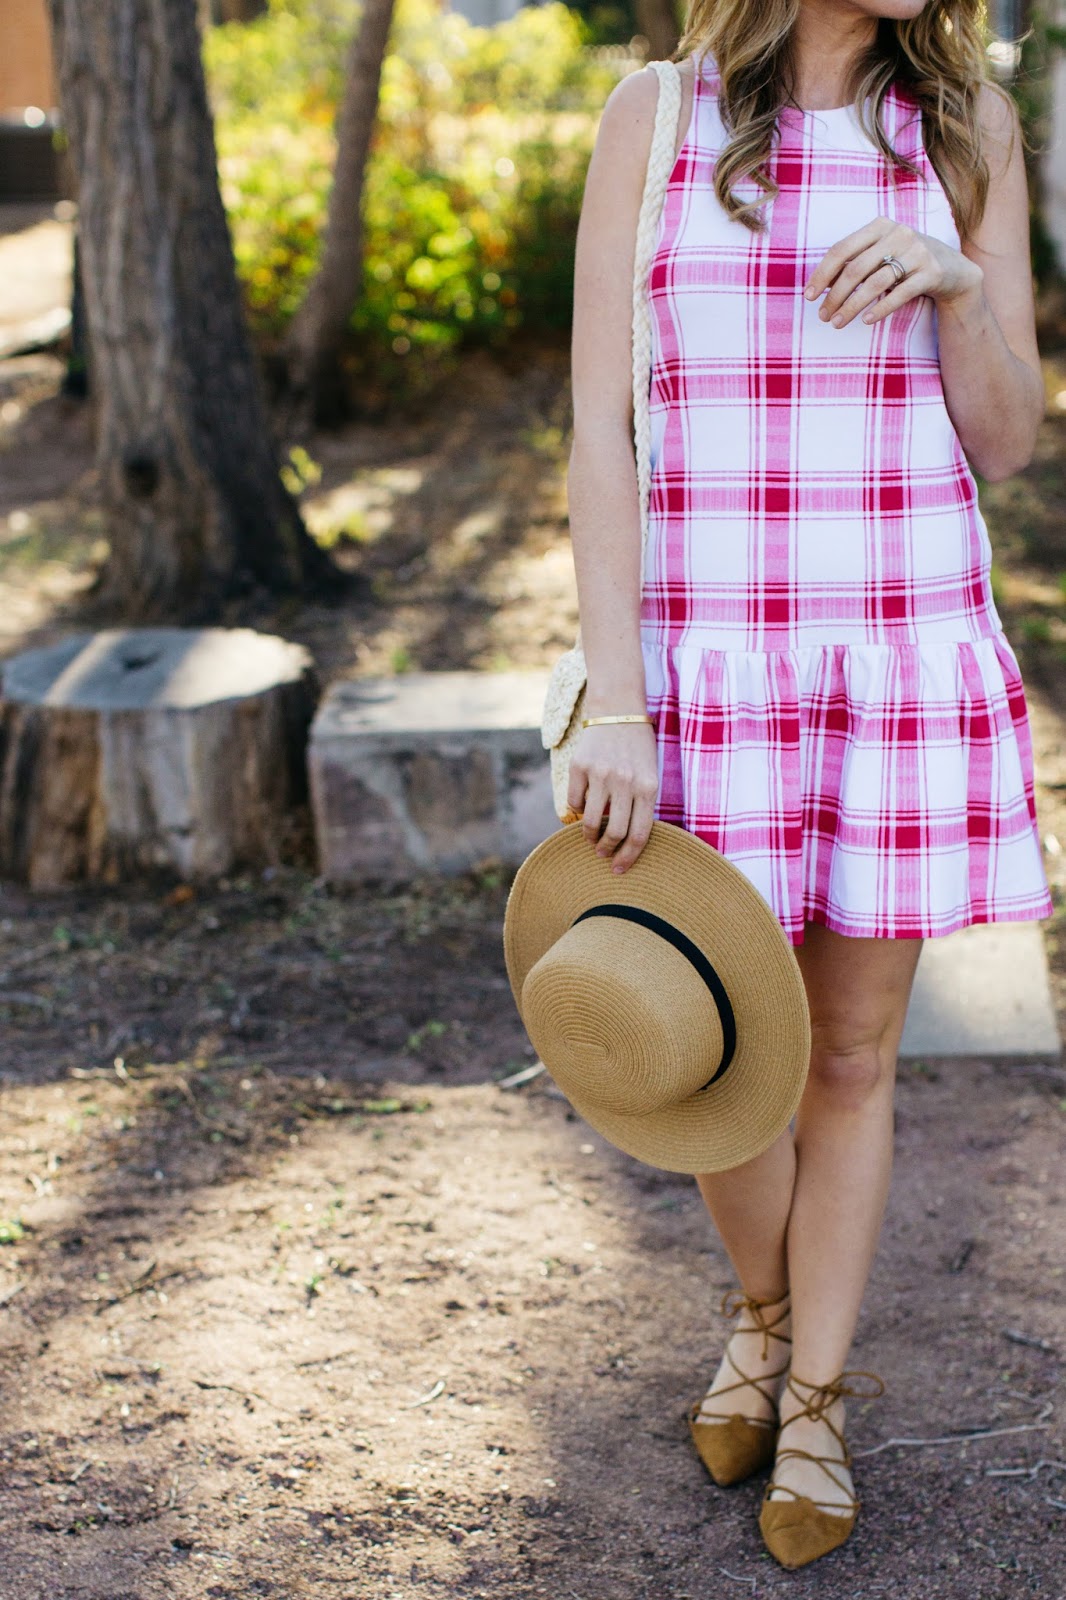 Red Check Dress With Boater Hat